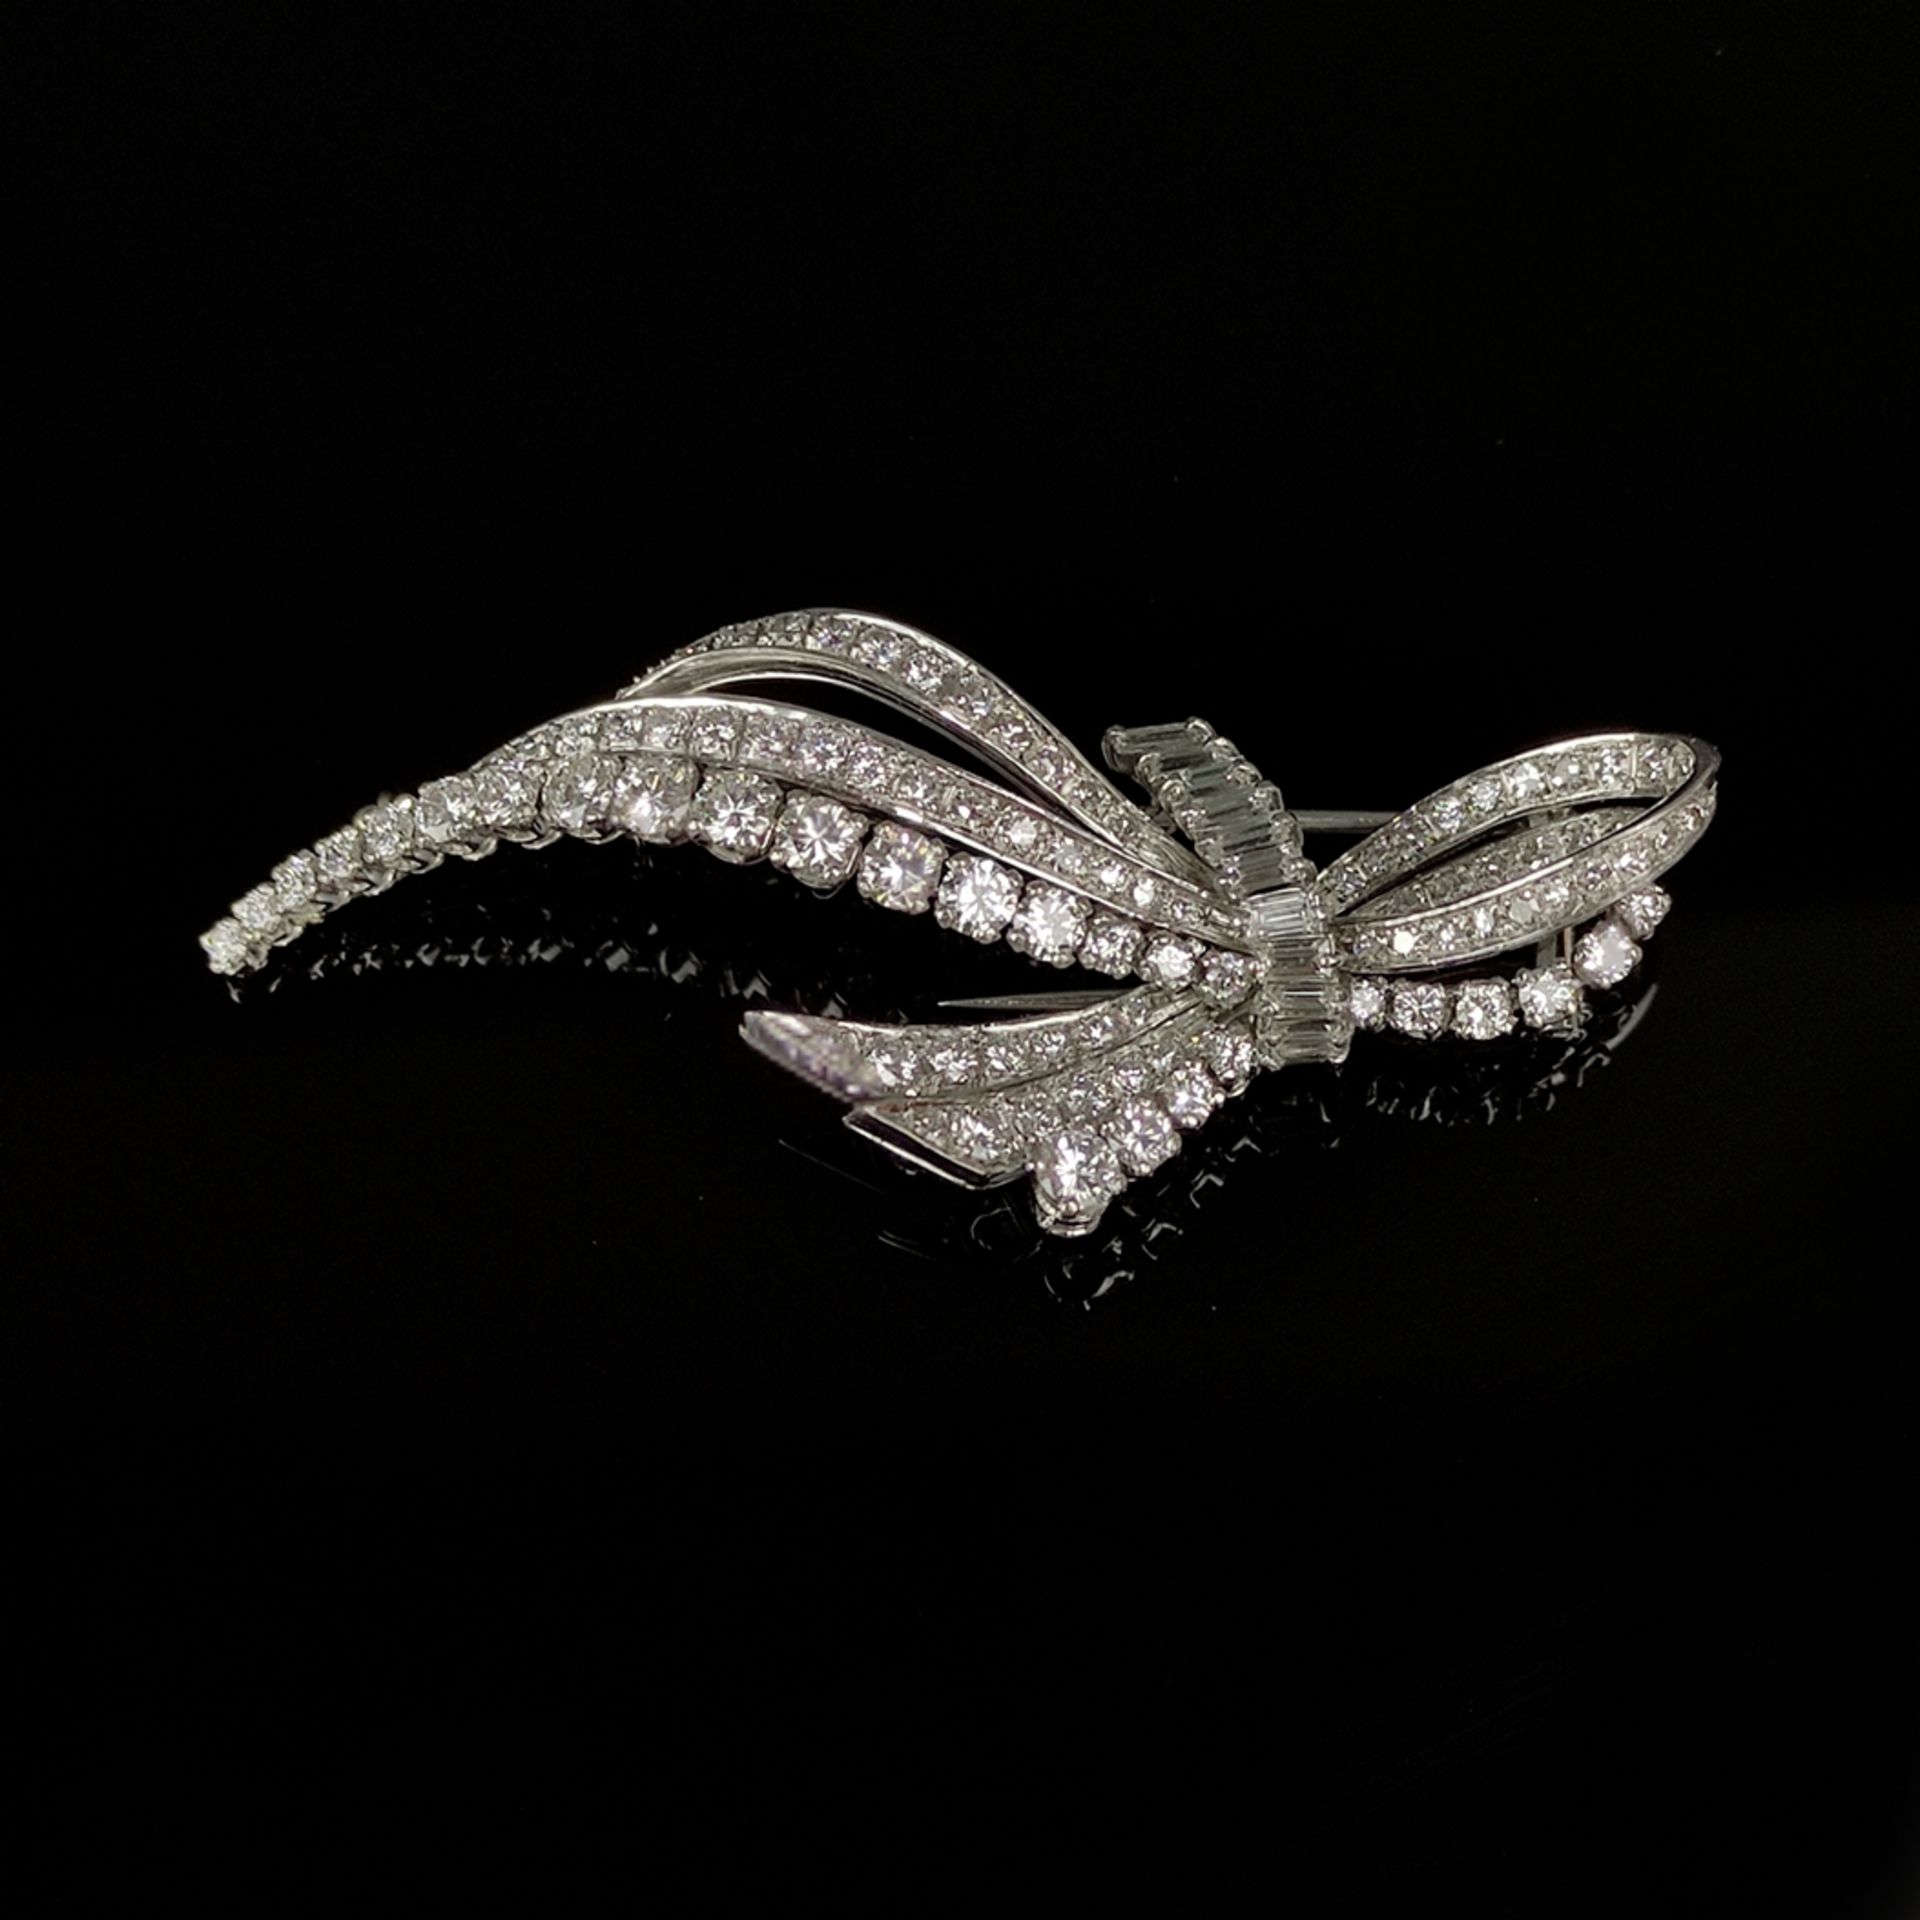 Exclusive diamond brooch, 750/18K white gold (hallmarked), 13.6g, modern ribbon shape, set with a t